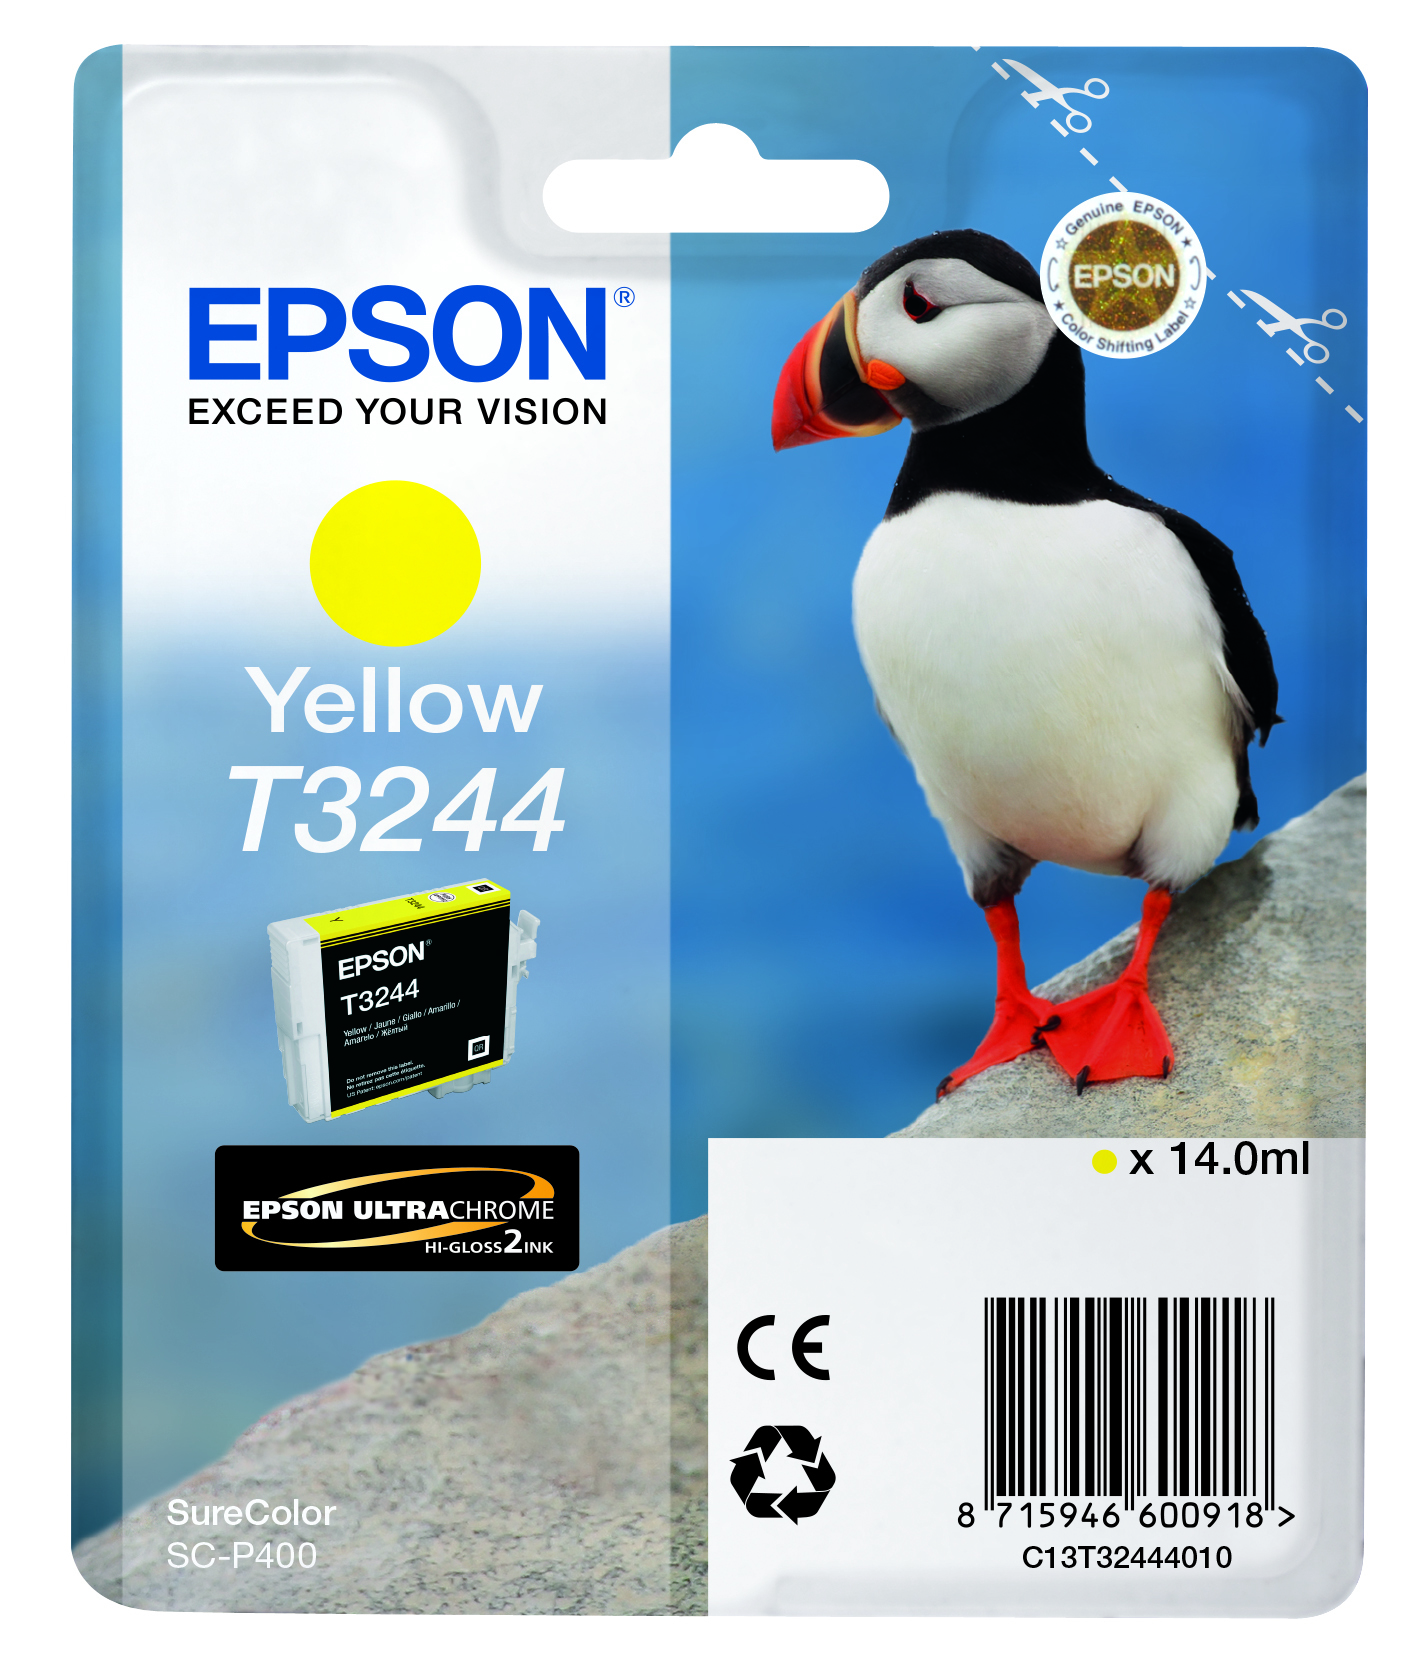 Epson T3244 Yellow single pack / geel